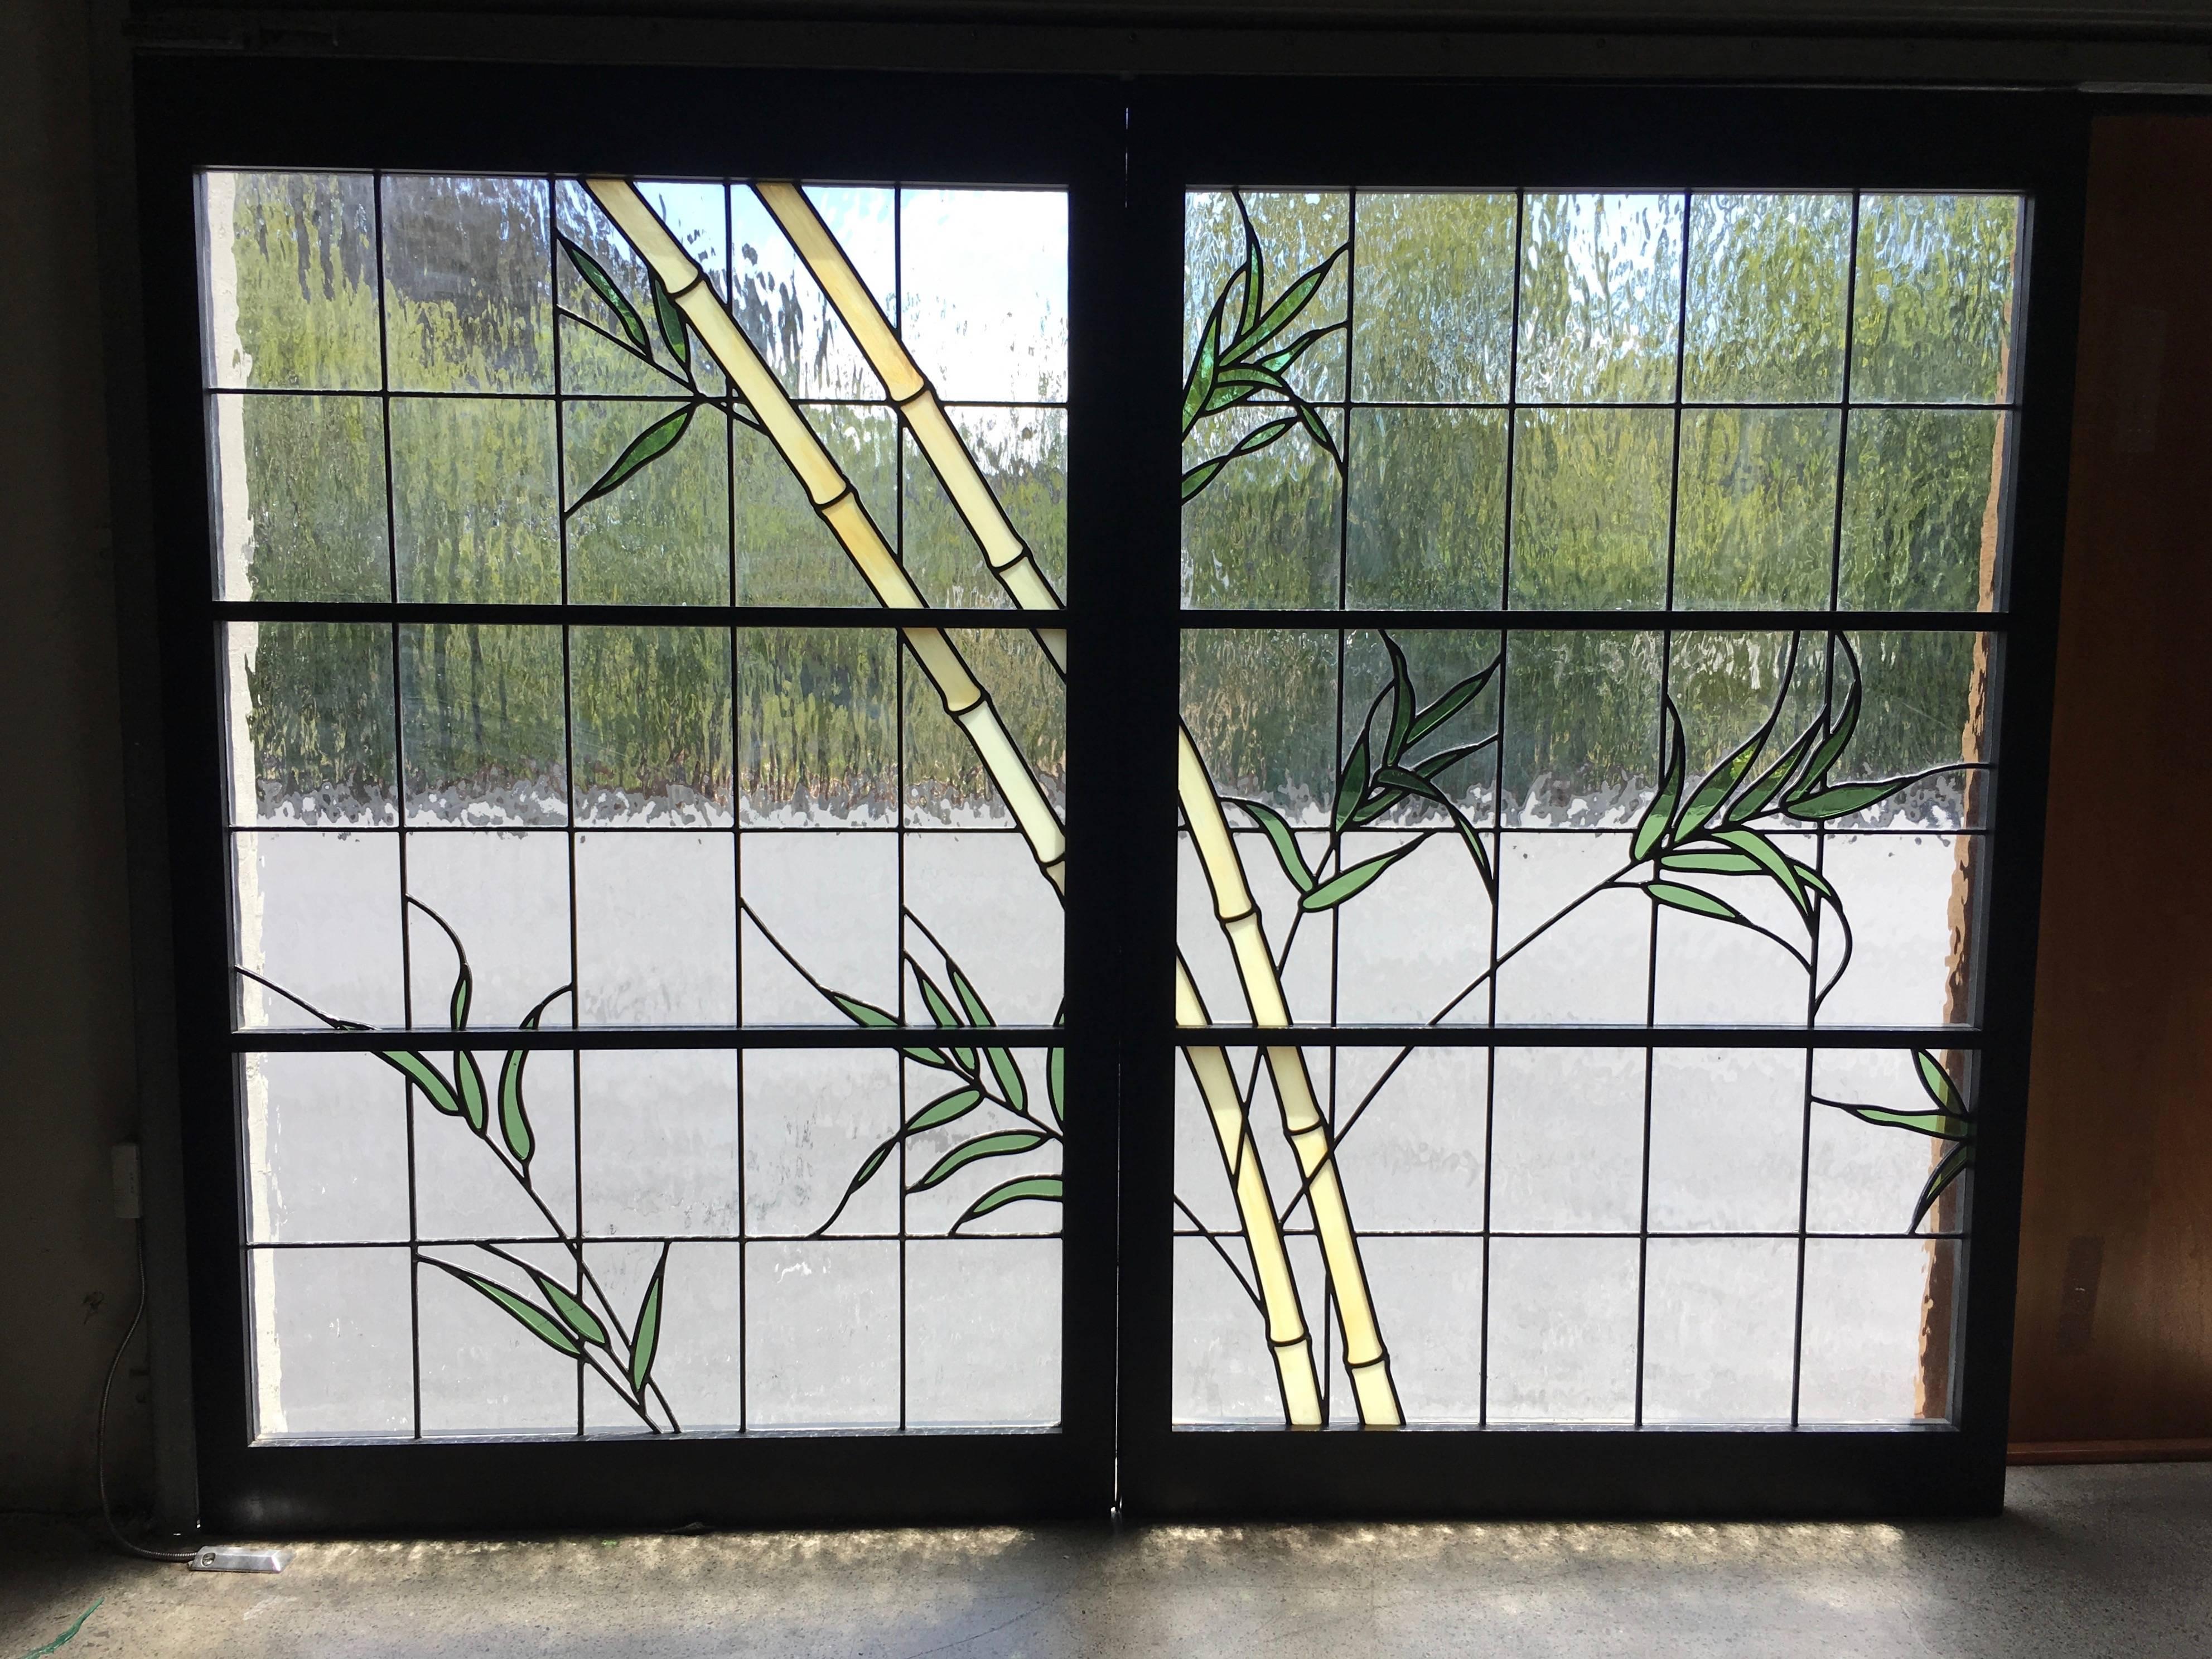 Pair of stained glass windows in a bamboo motif each one measures 36.25 wide.